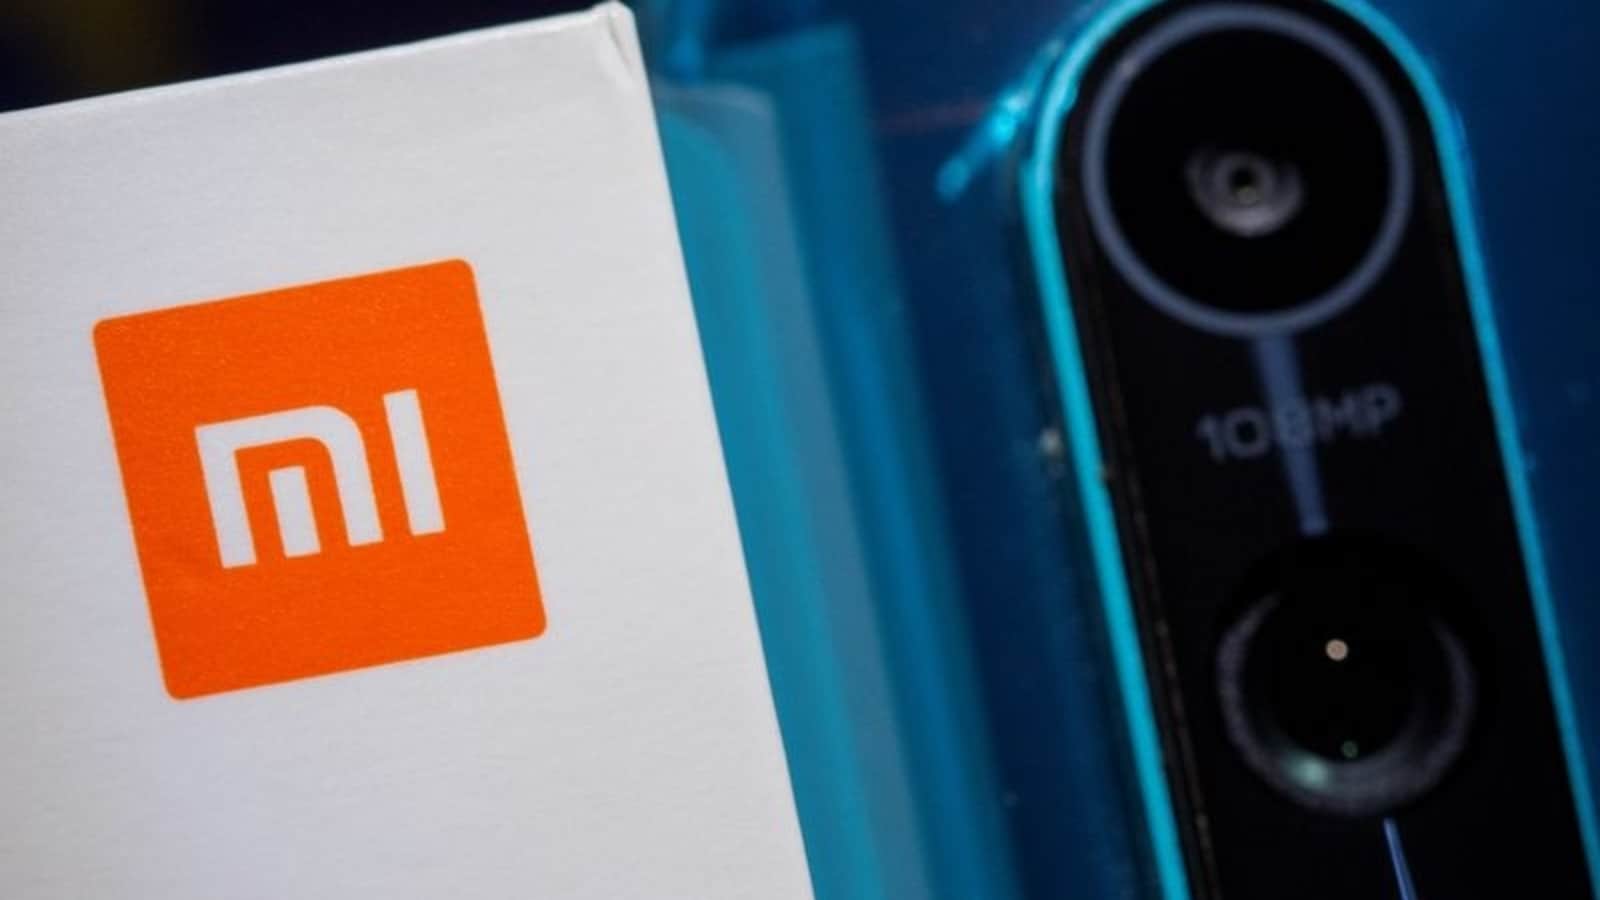 ED seizes ₹5,551 crore from Chinese smartphone giant Xiaomi's bank accounts | Latest News India - Hindustan Times